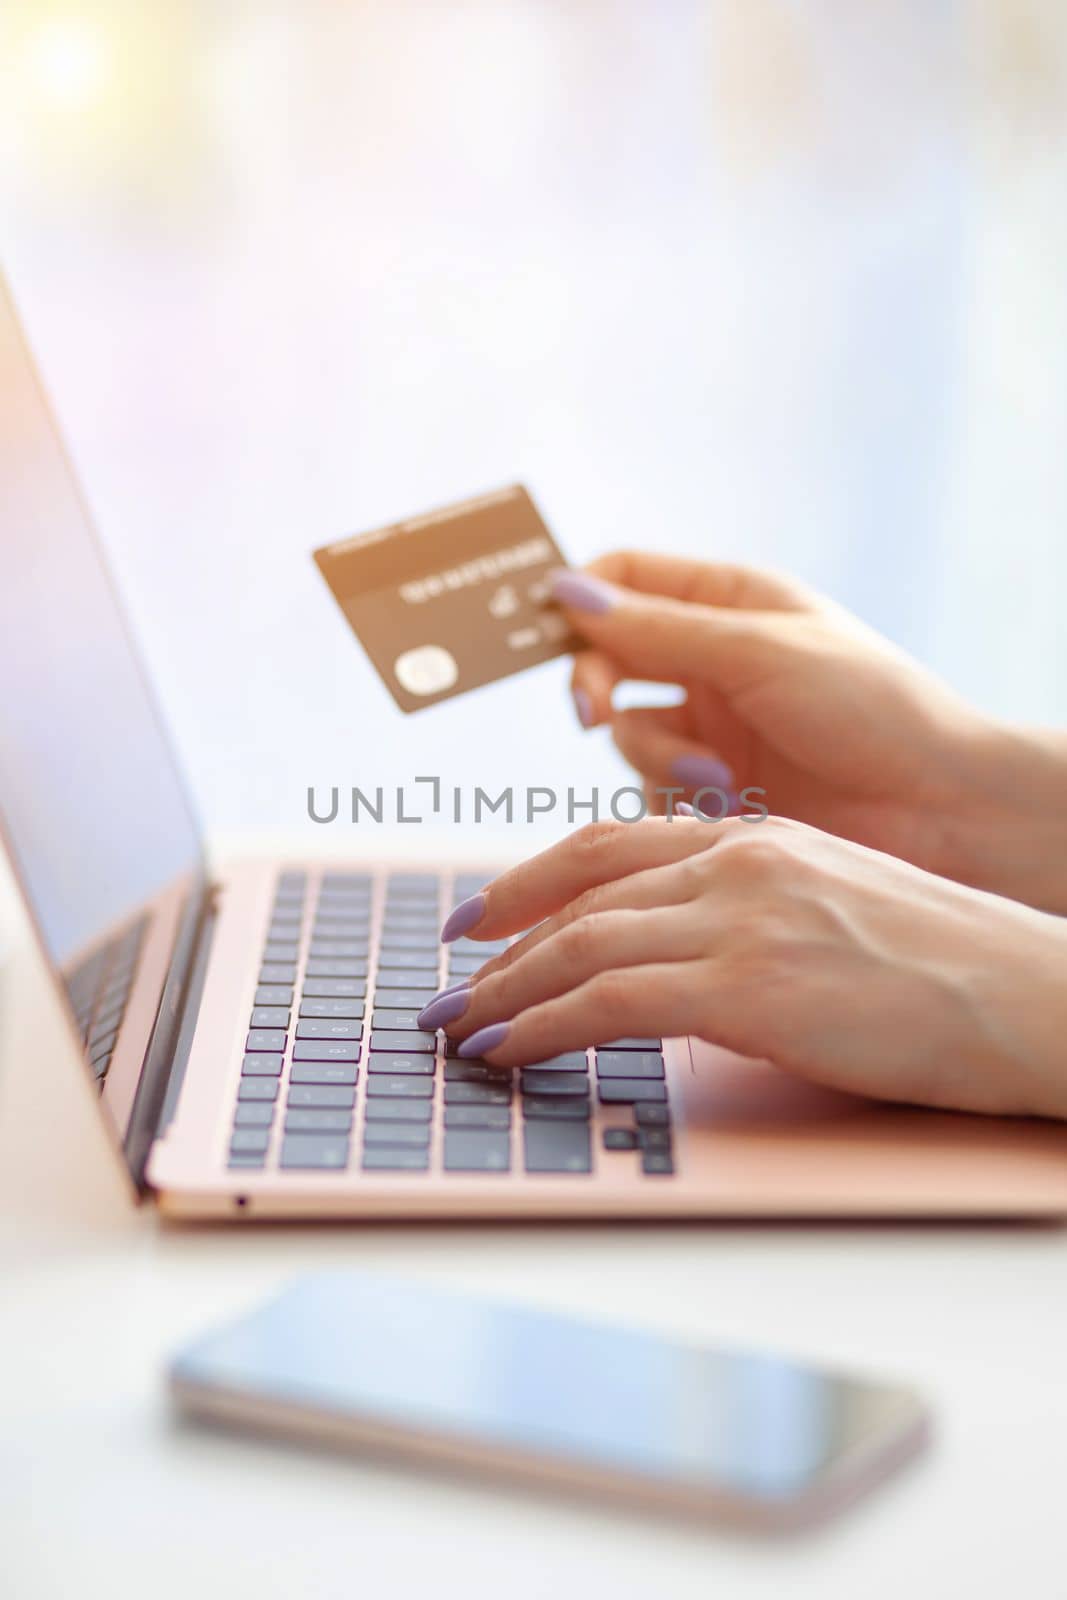 Purchases via the Internet and payment for services buy credit card. Hands type text and enter data on the laptop keyboard. An office worker checks his email while sitting at his desk